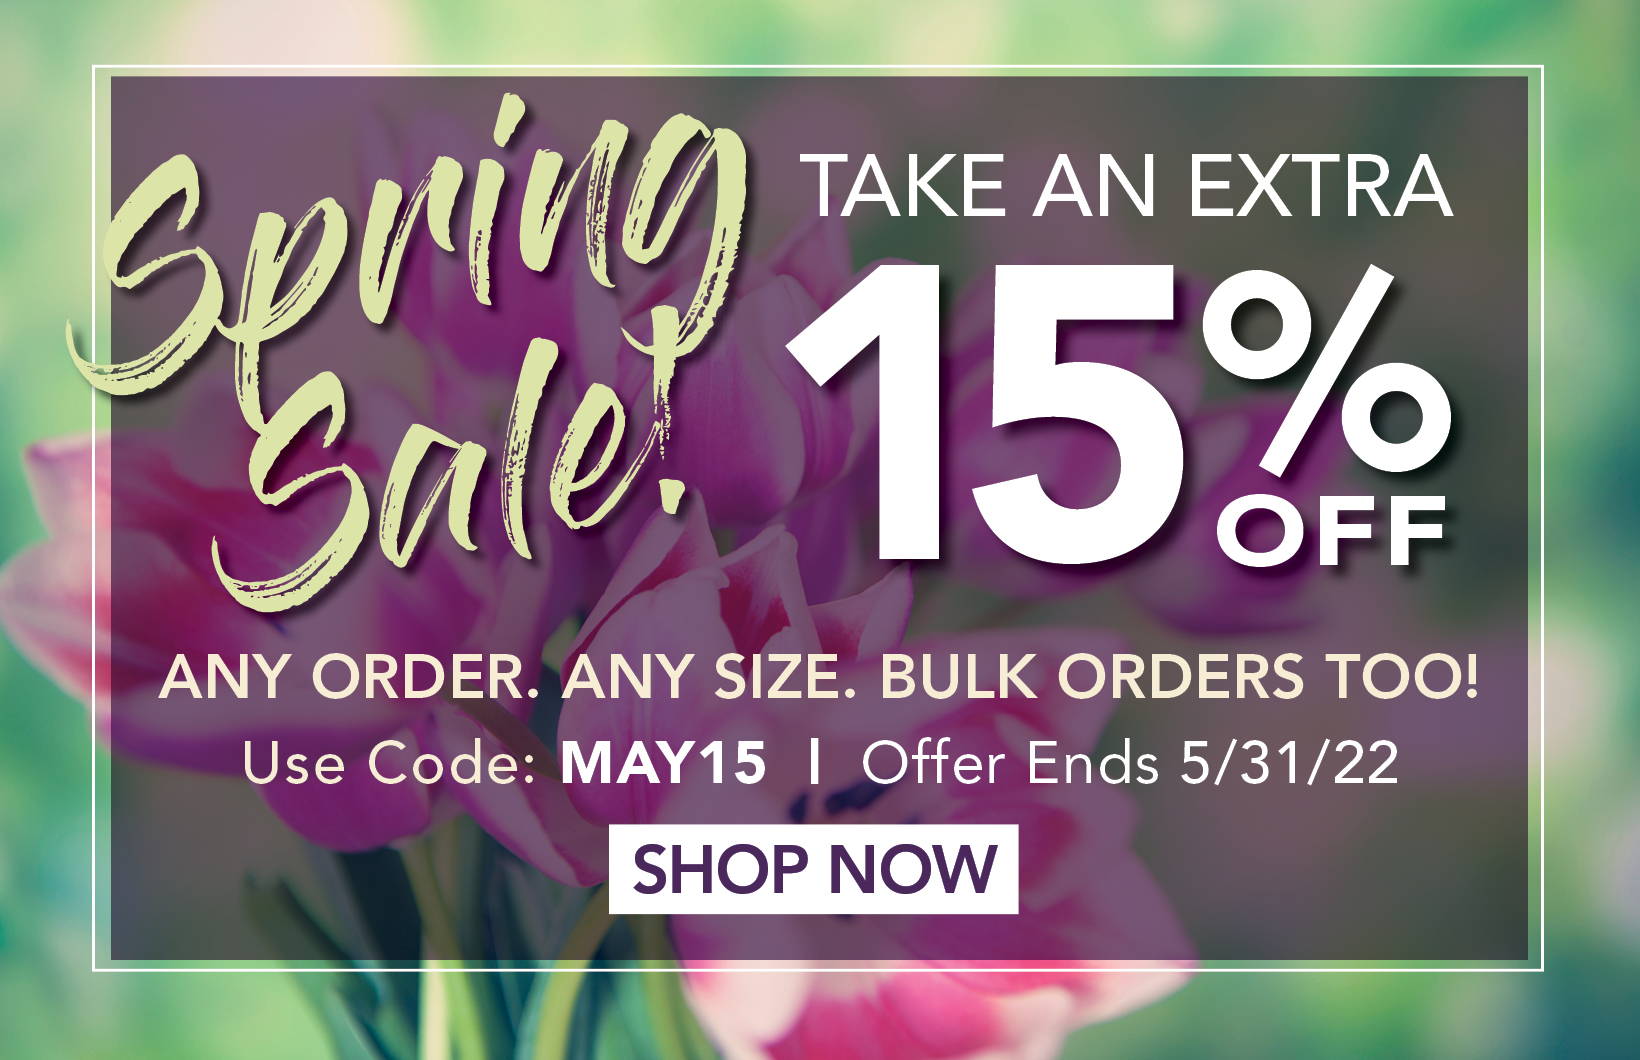 Spring Sale! Take an EXTRA 15% off with promo code MAY15. Offer ends 5/31